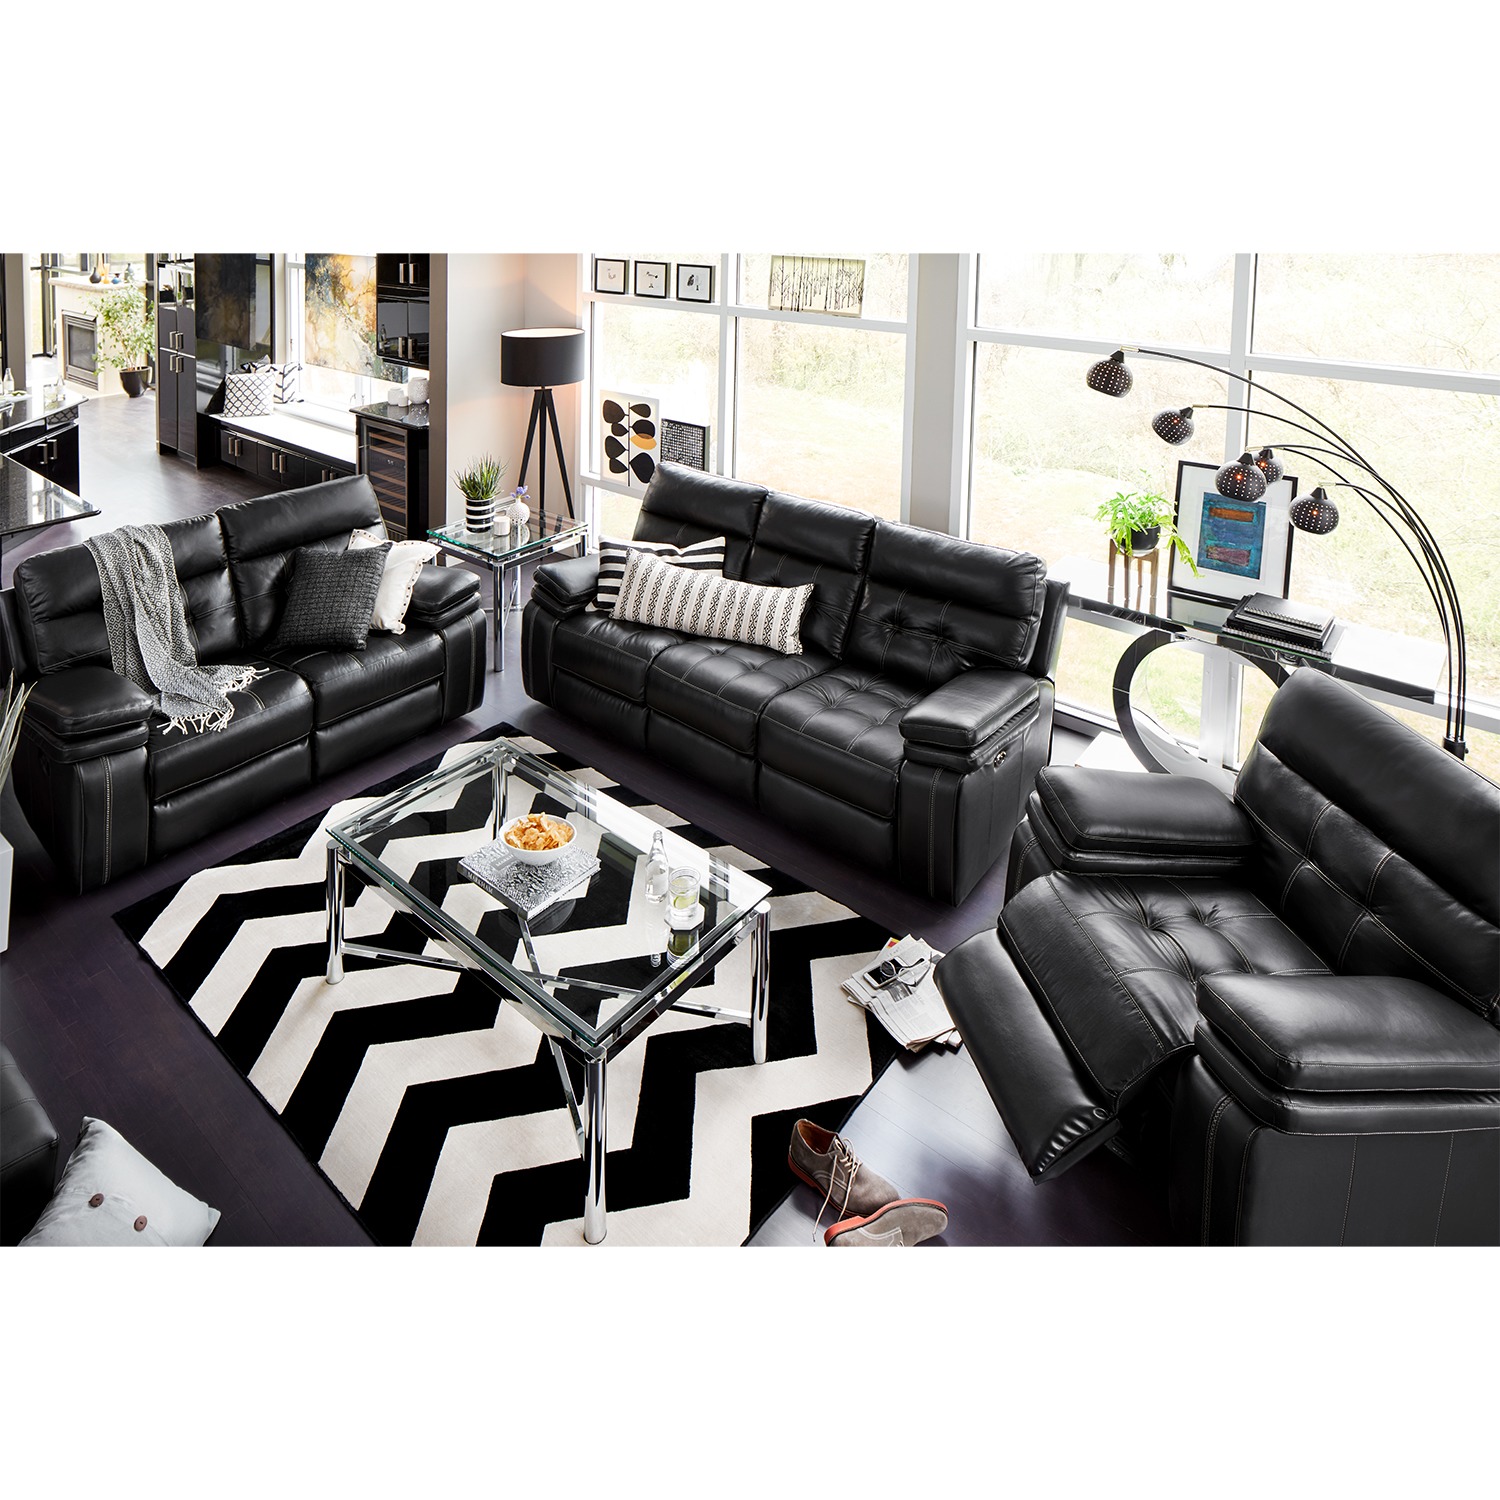 Sofas & Couches | Living Room Seating | Value City Furniture